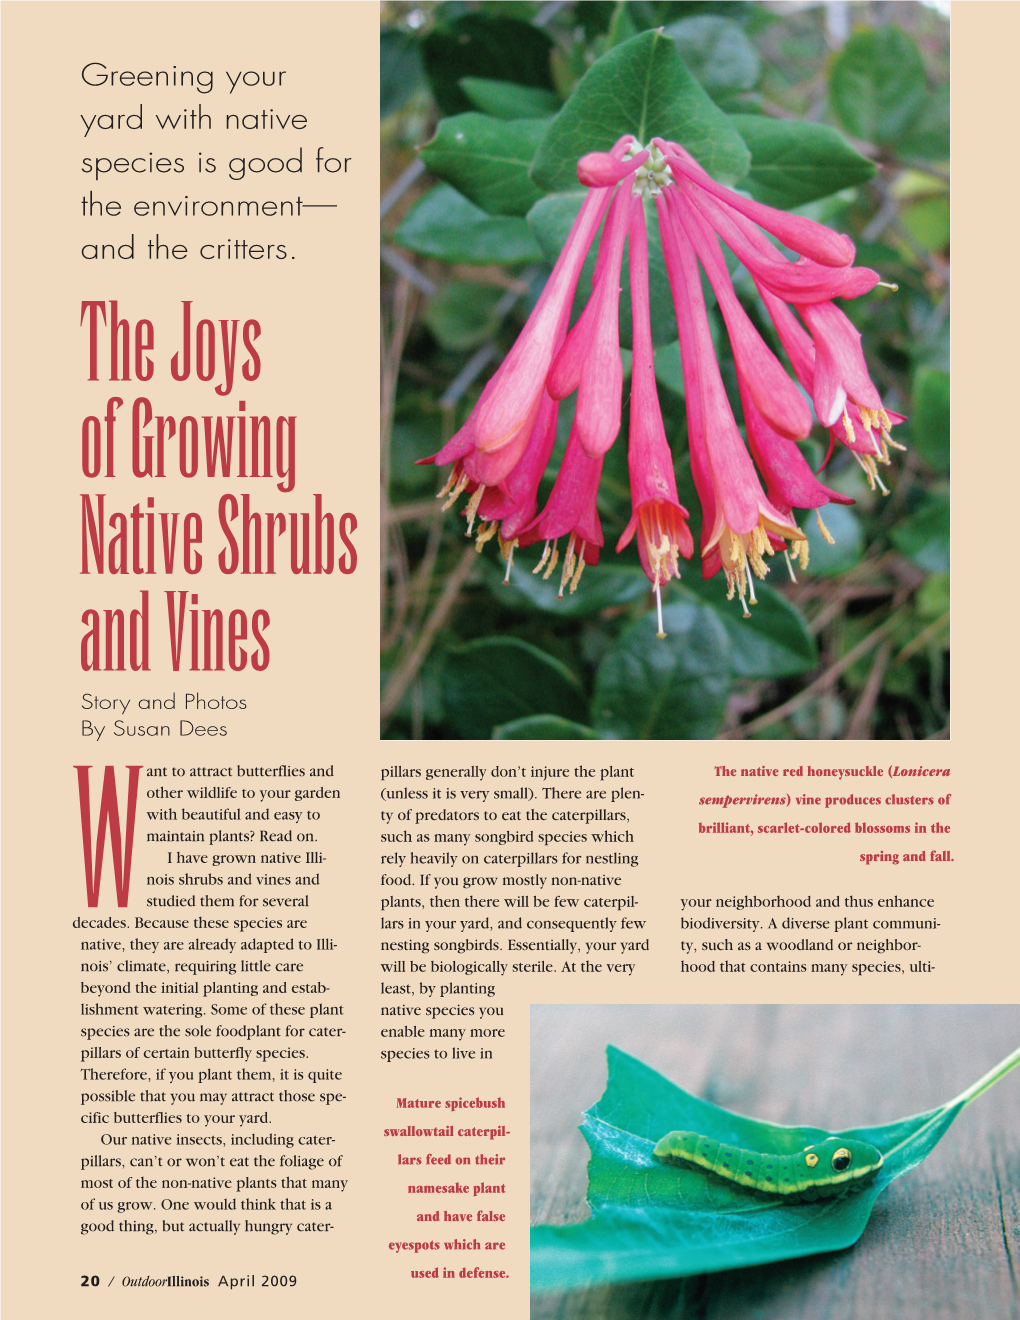 Thejoys Ofgrowing Nativeshrubs Andvines Story and Photos by Susan Dees